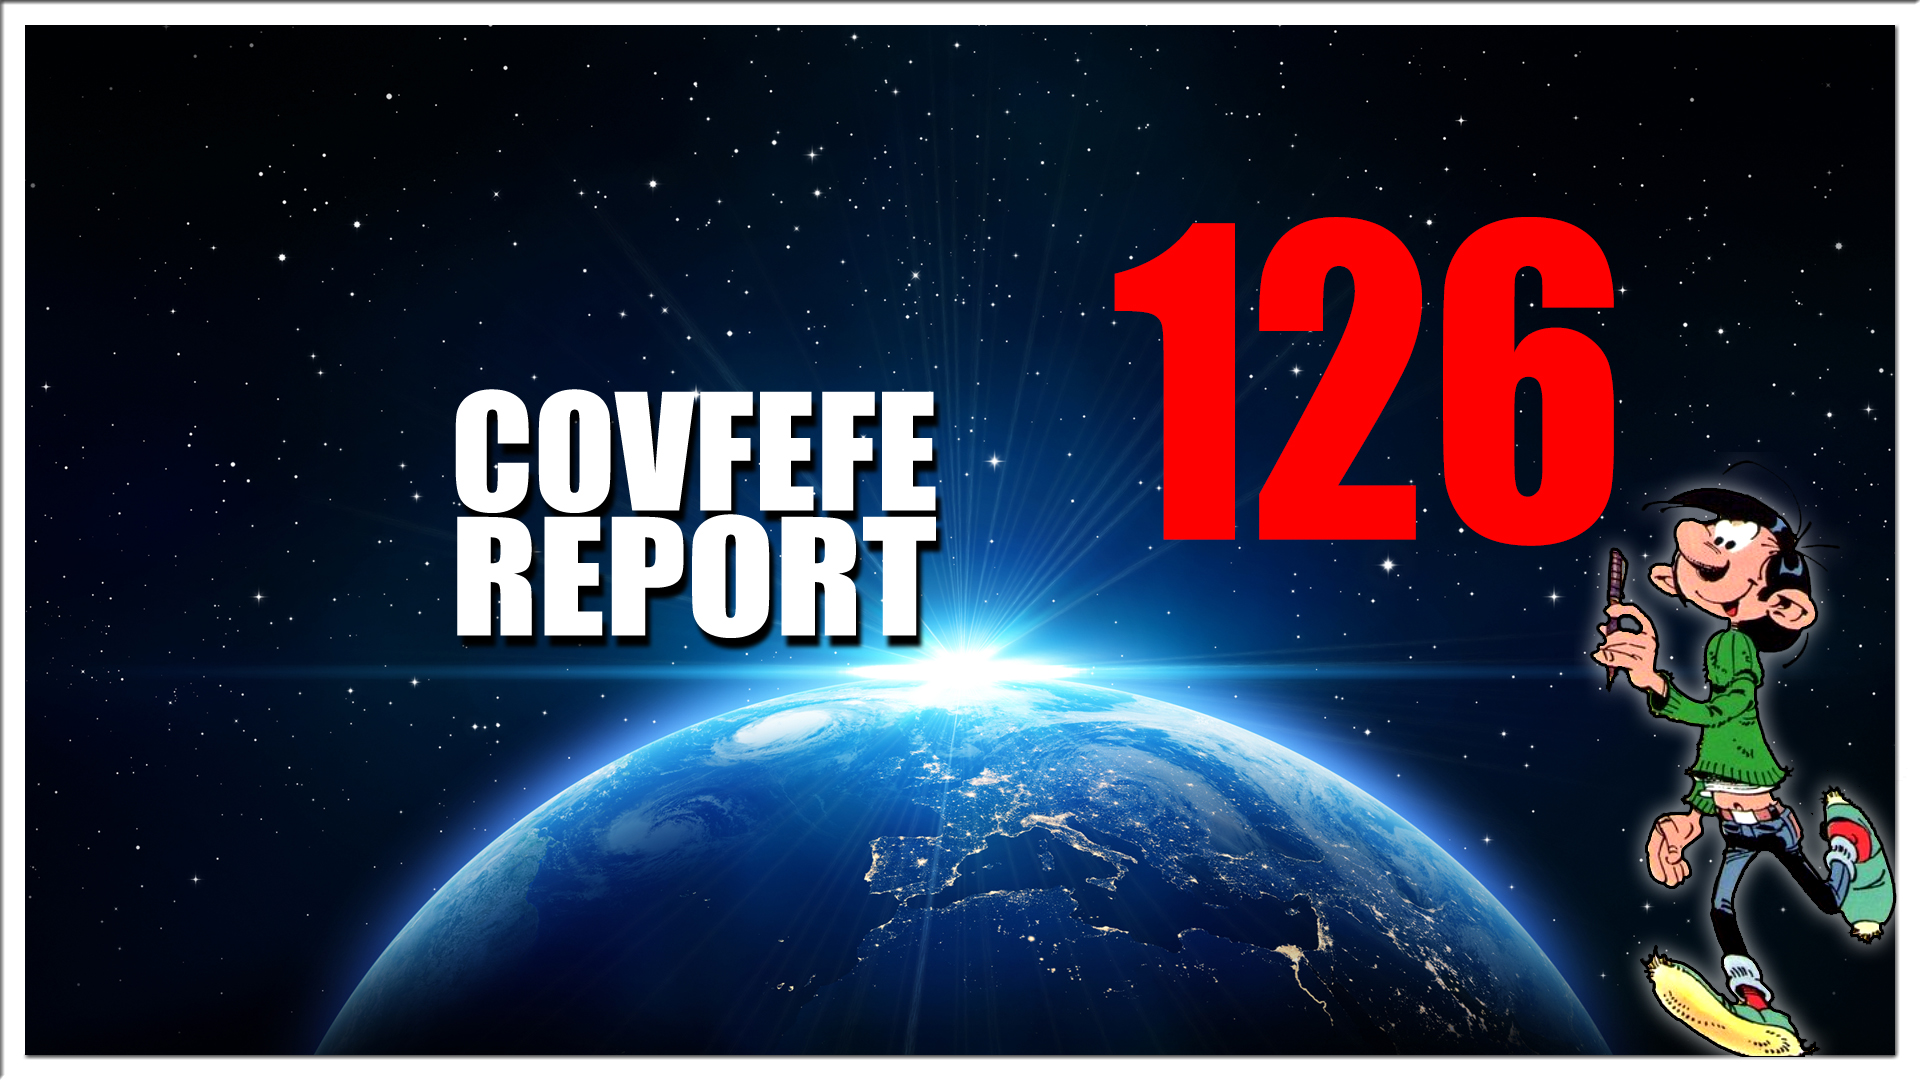 Covfefe Report 126. Coronaloos, ECB, Nout Wellink, Buitenhof, The King is dead, Long live the King